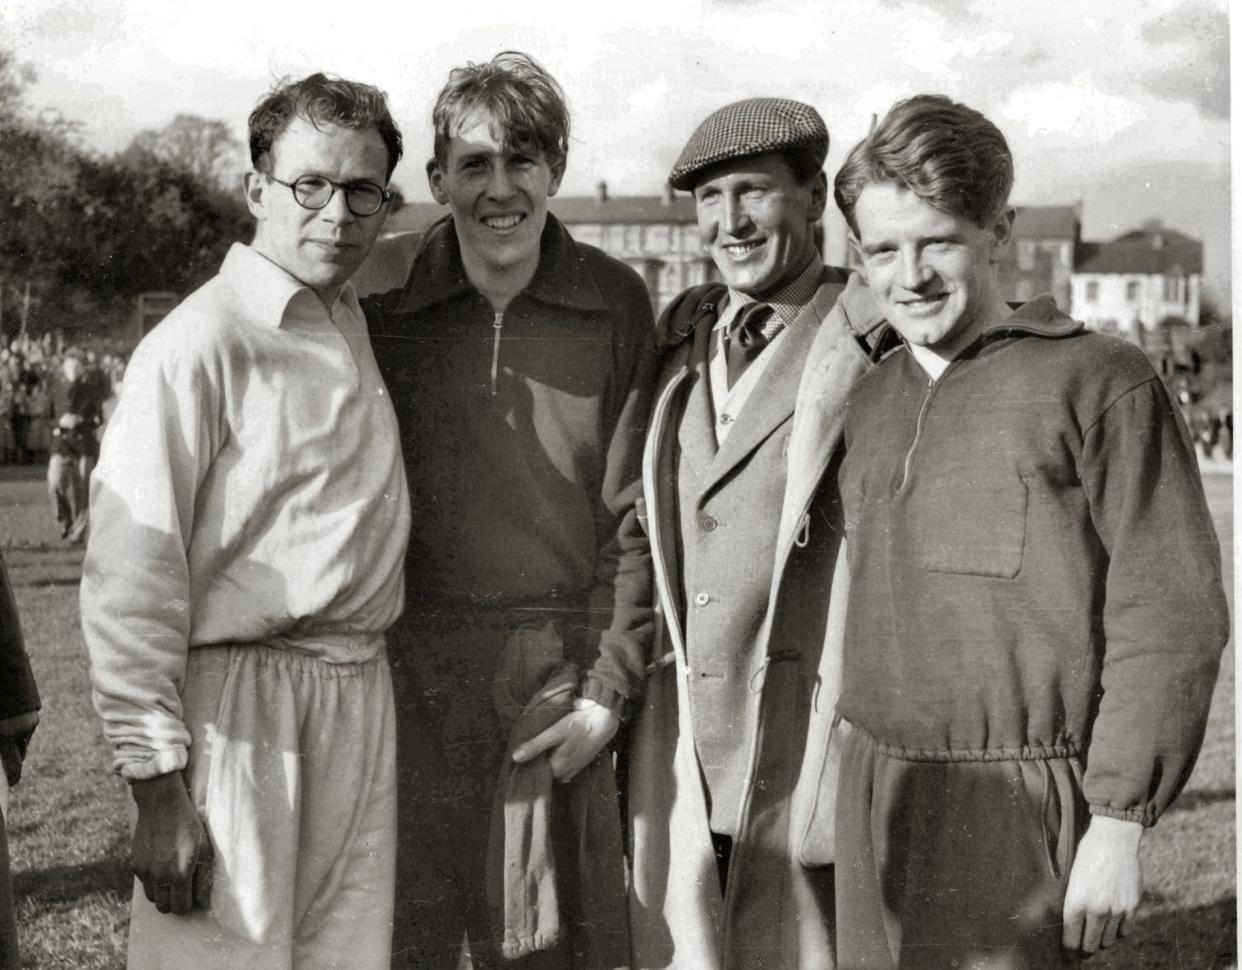 The men who made the impossible happen: Chris Brasher, Roger Bannister, his coach Franz Stampfl, and Chris Chataway